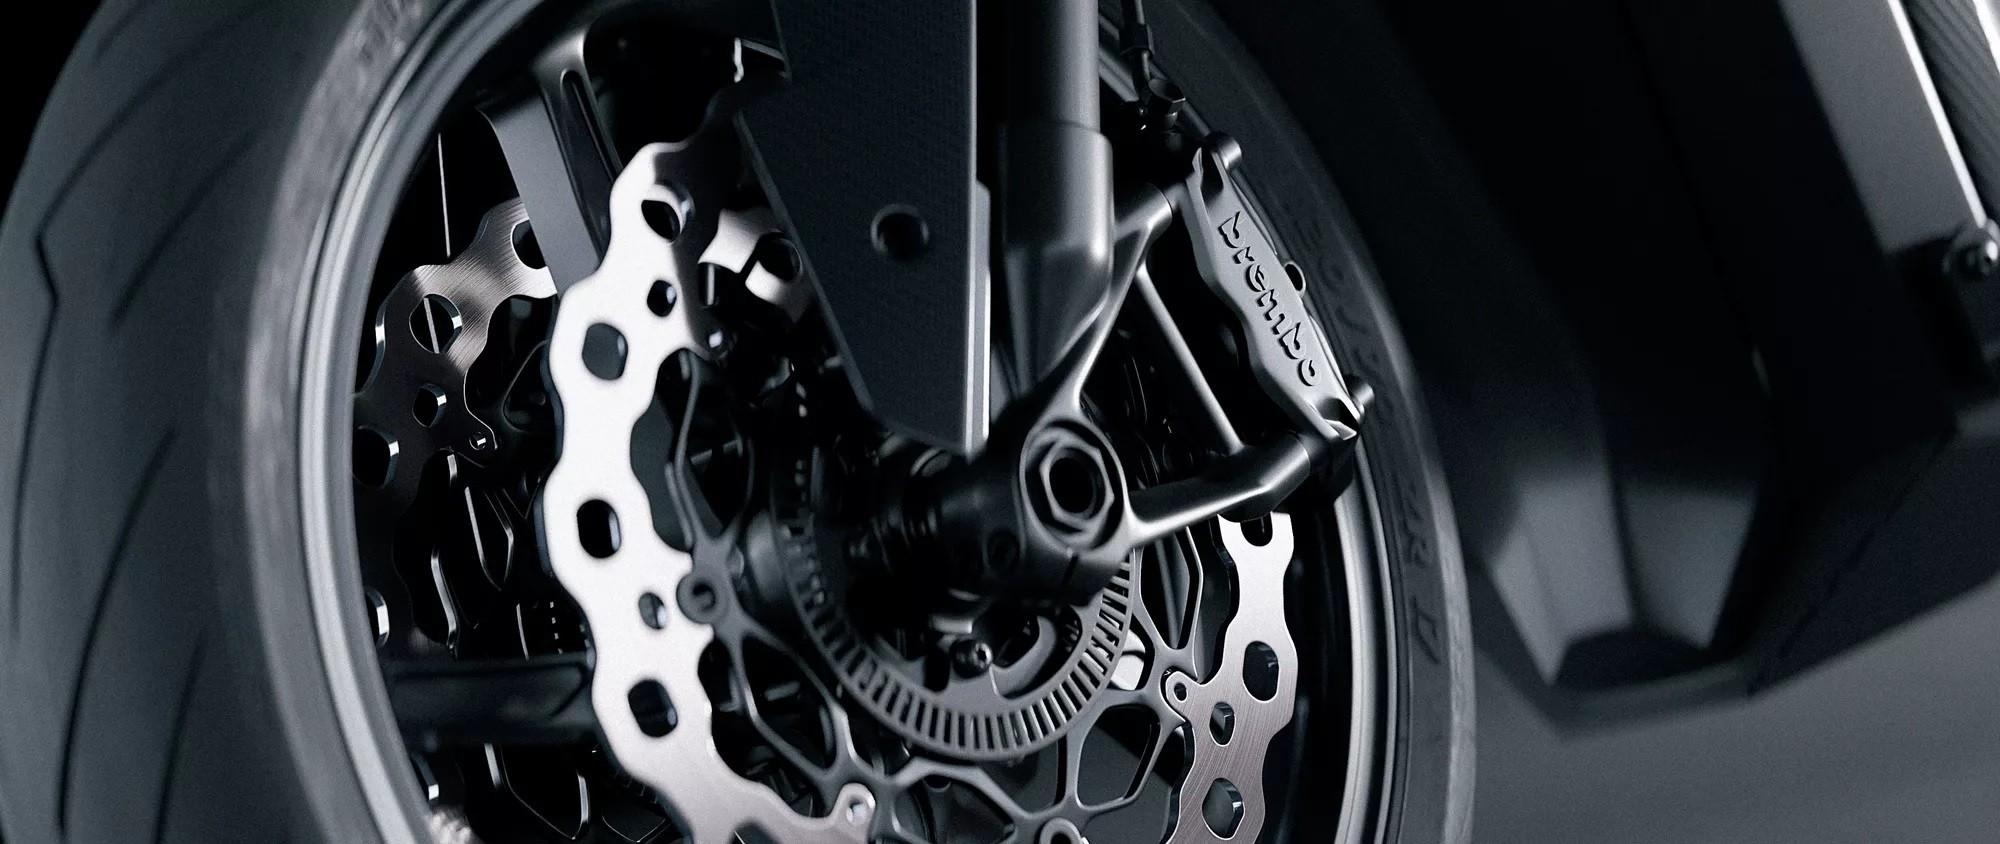 verge mika hakkinen signature edition is a bullet fast superbike designed by the f1 legend 7